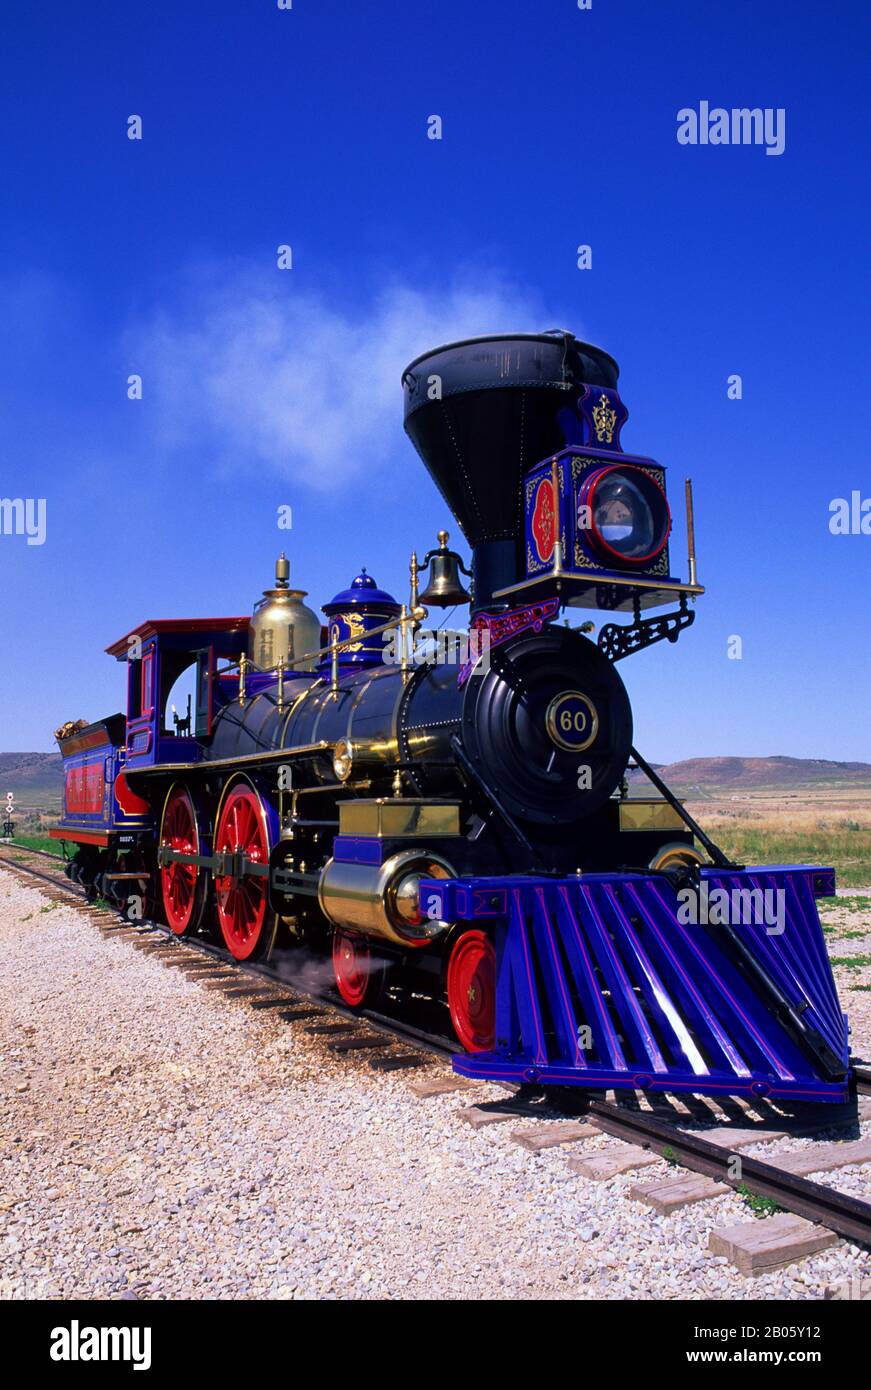 USA, UTAH, PROMONTORY POINT, GOLDEN SPIKE NATIONAL HISTORIC SITE,CENTRAL PACIFIC STEAM ENGINE Stock Photo